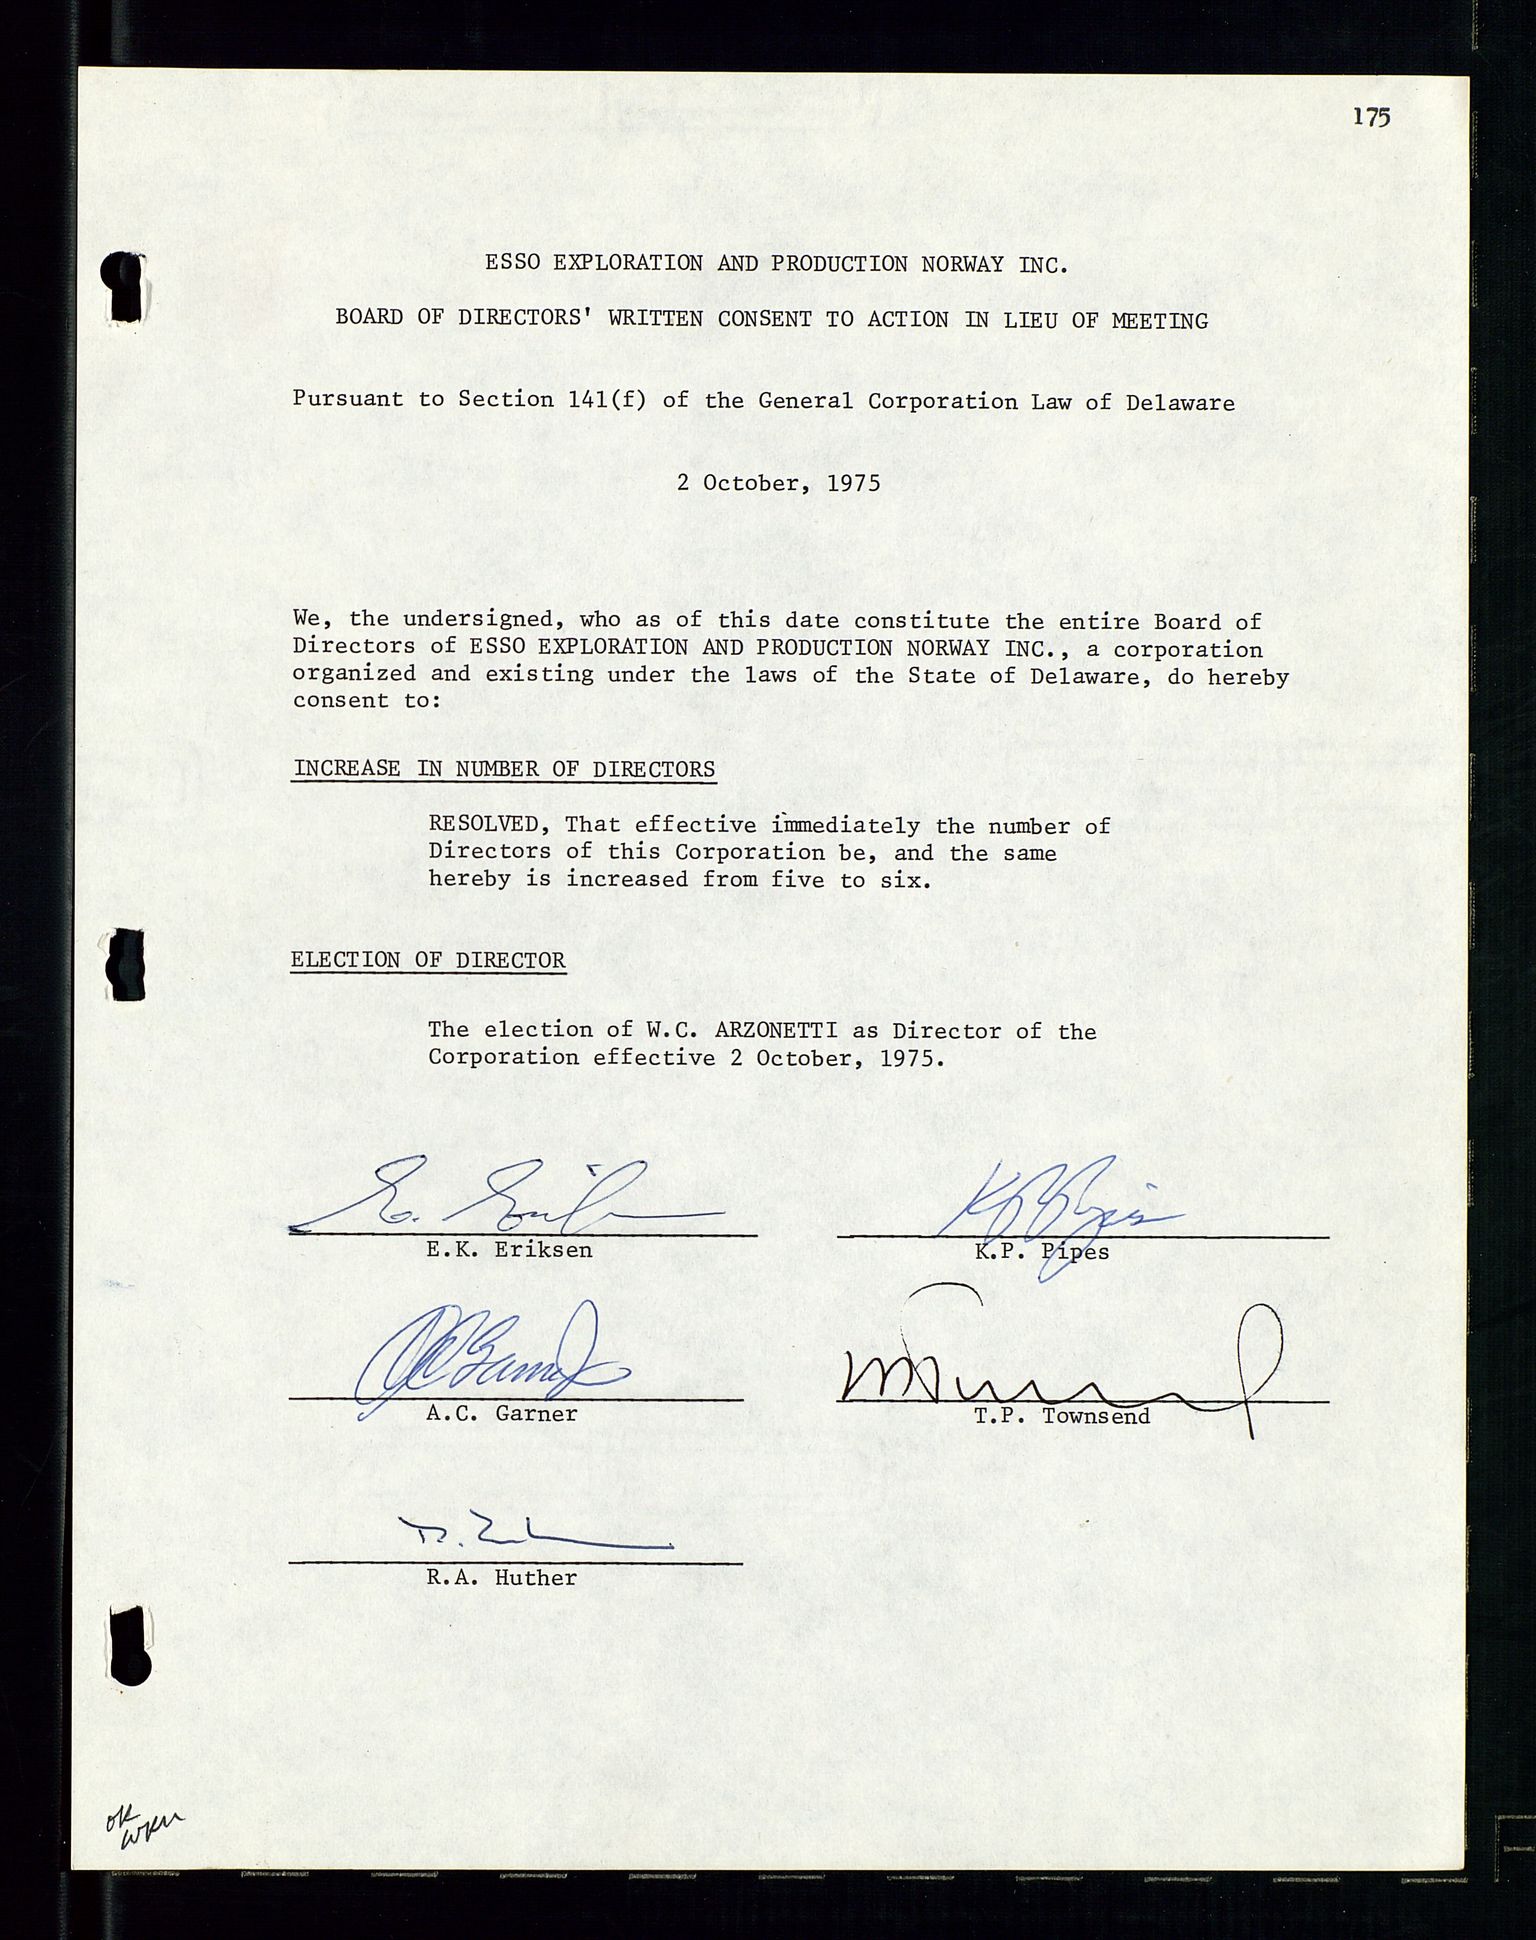 Pa 1512 - Esso Exploration and Production Norway Inc., SAST/A-101917/A/Aa/L0001/0002: Styredokumenter / Corporate records, Board meeting minutes, Agreements, Stocholder meetings, 1975-1979, s. 6